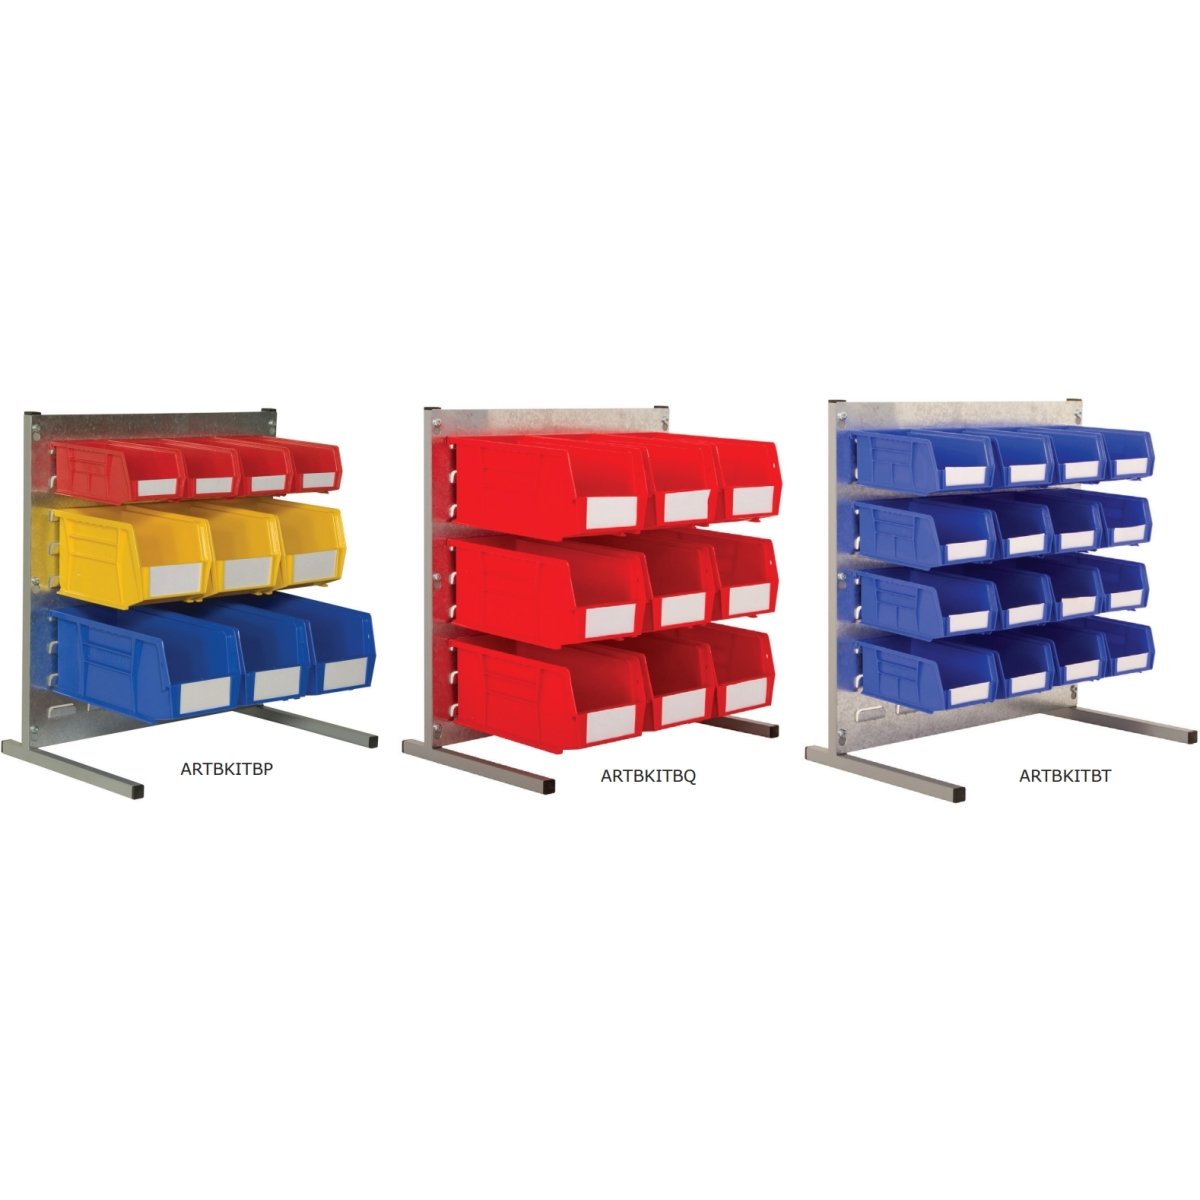 Wall Louvre & Bench Stand Kits - Warehouse Storage Products